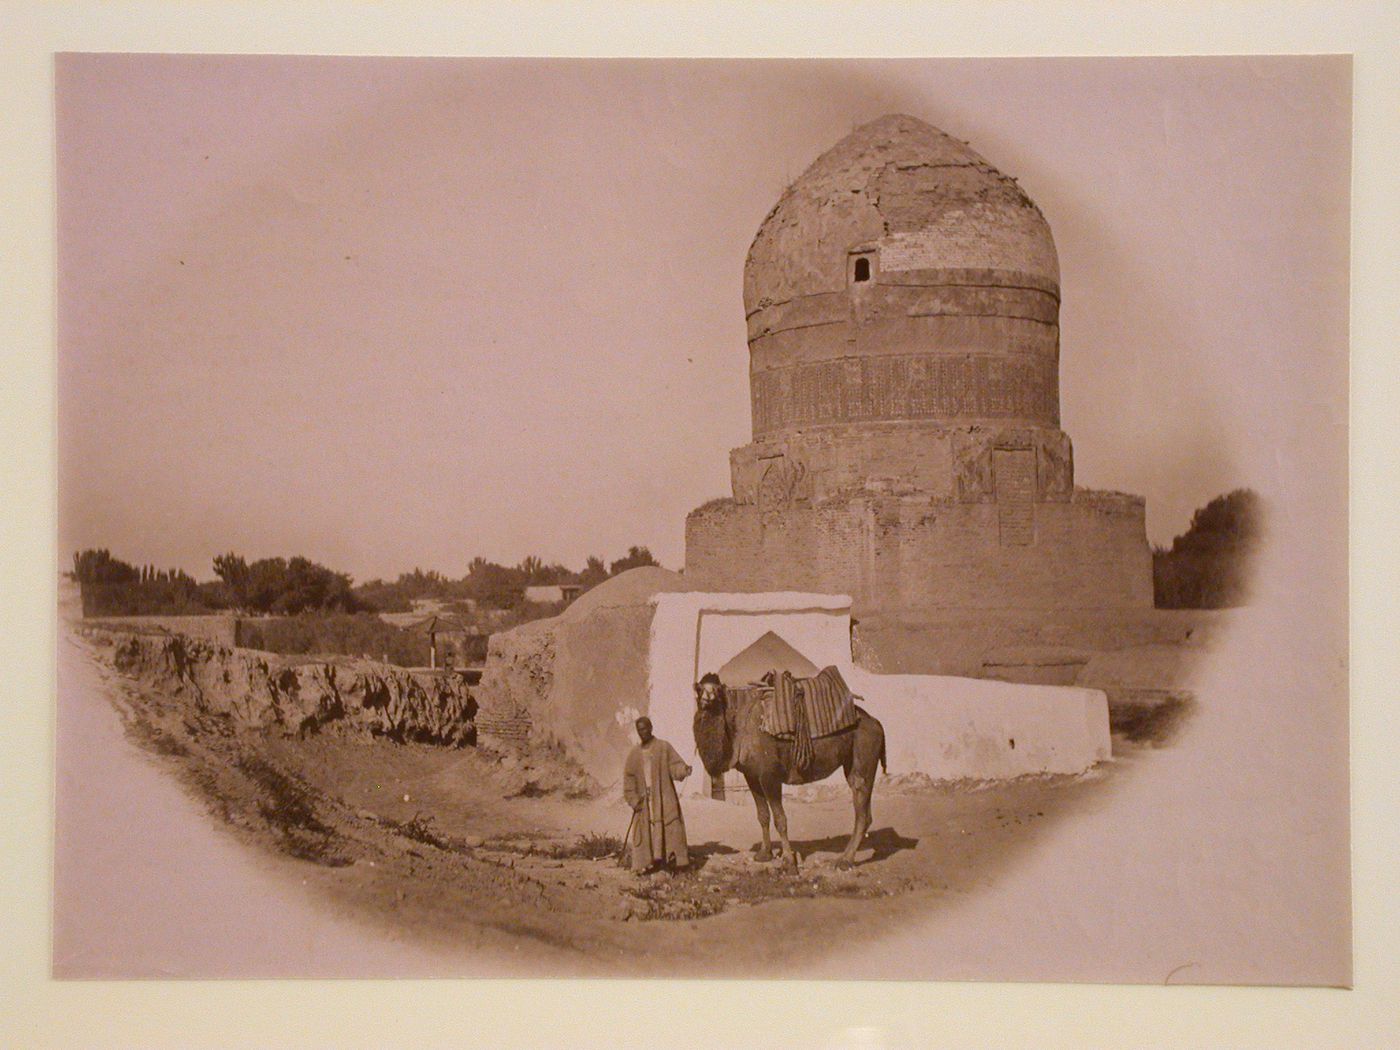 View of a Moslem mosque with man and camel, Uzbekistan, former Soviet Union